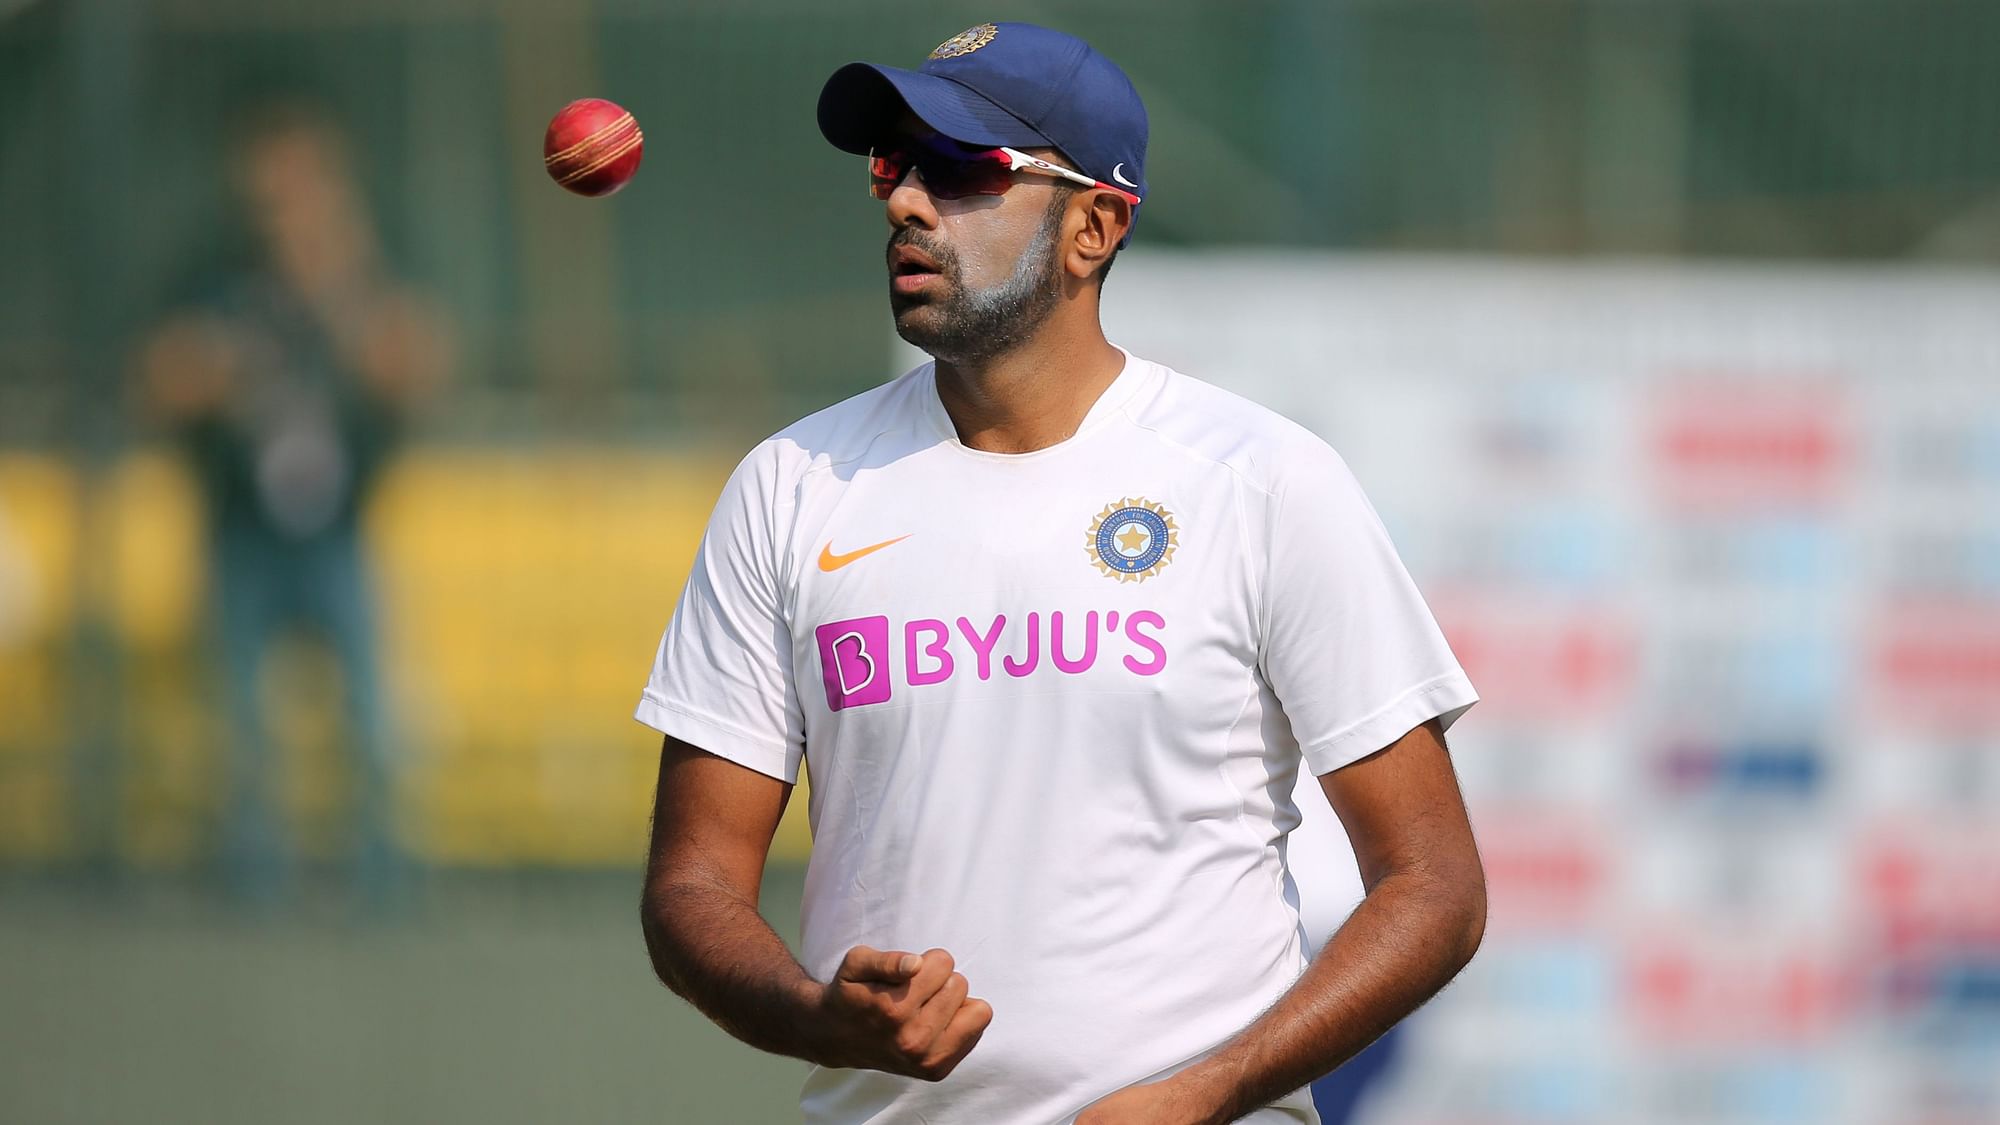 Sanjay Manjrekar has said he has a “few problems” when people call Ashwin as “one of the all-time greats of the game”.